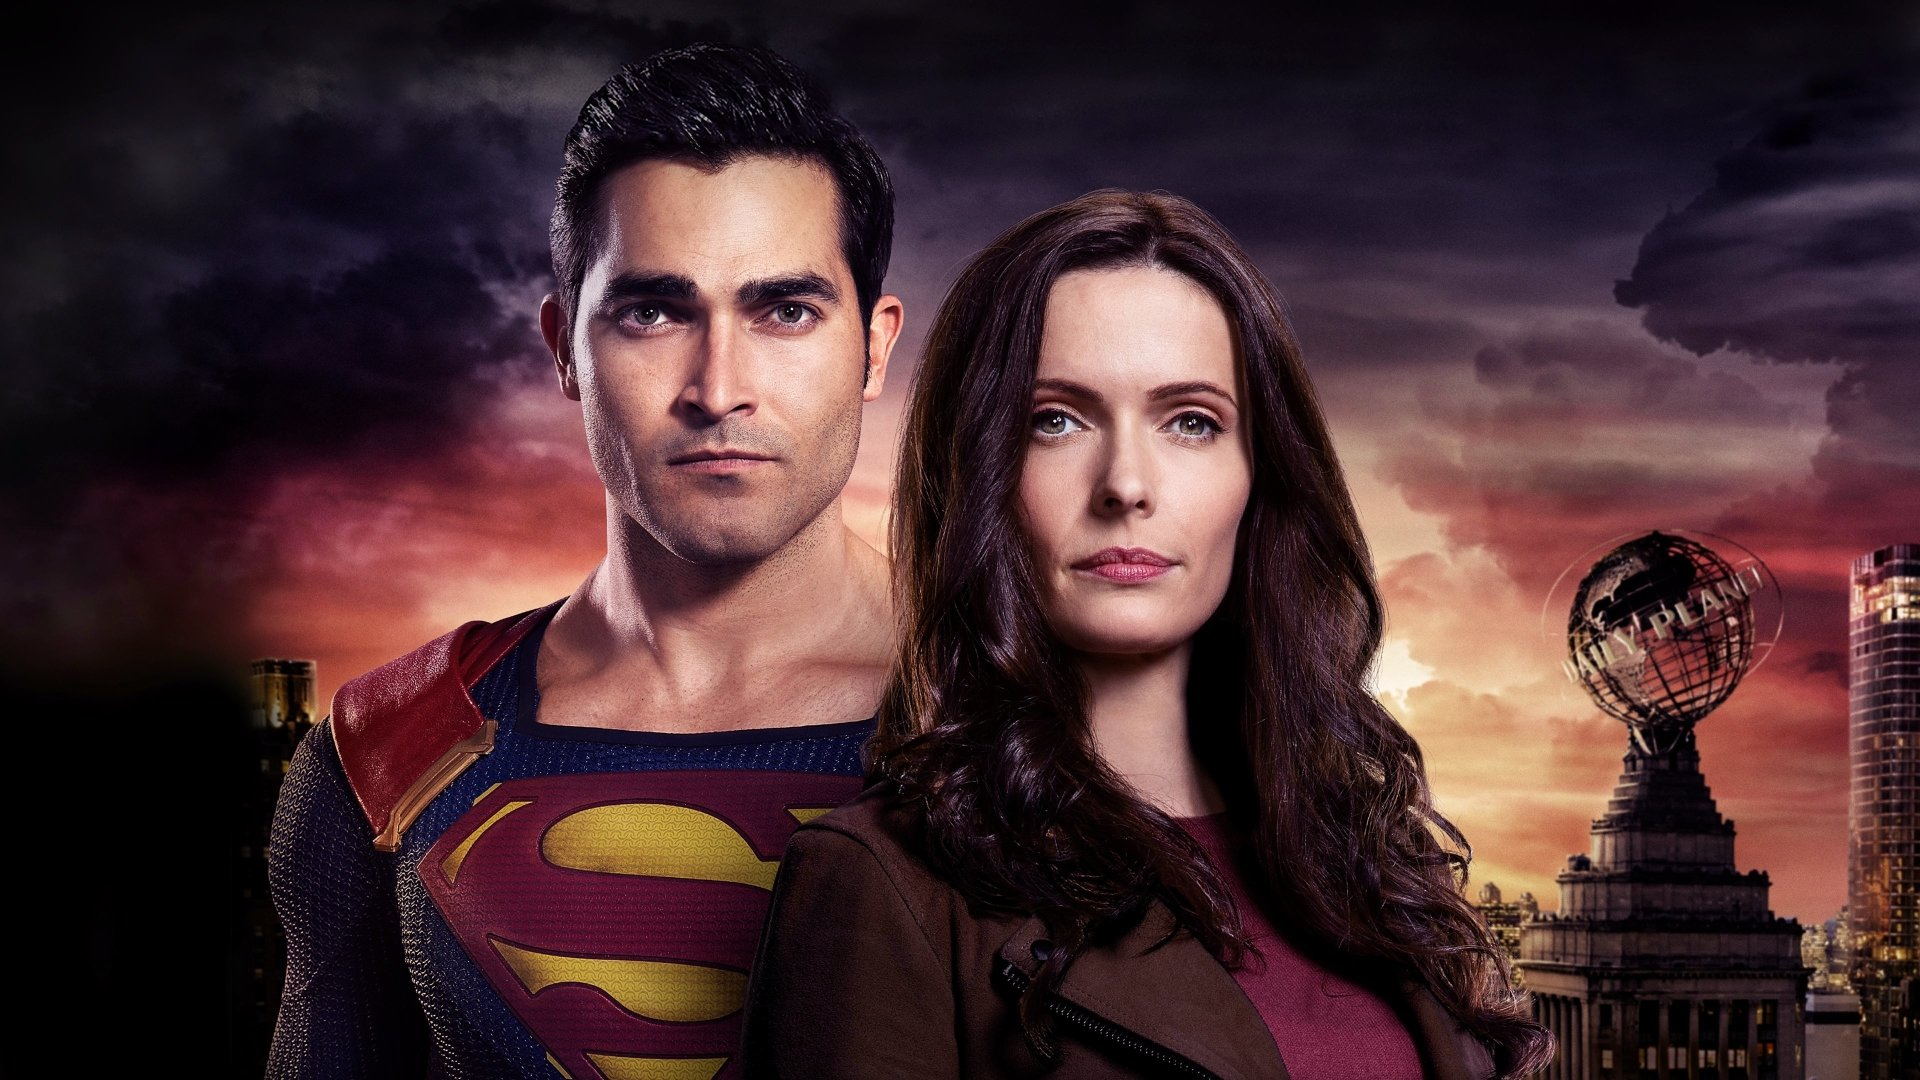 1920x1080 50+ Superman and Lois HD Wallpapers and Backgrounds